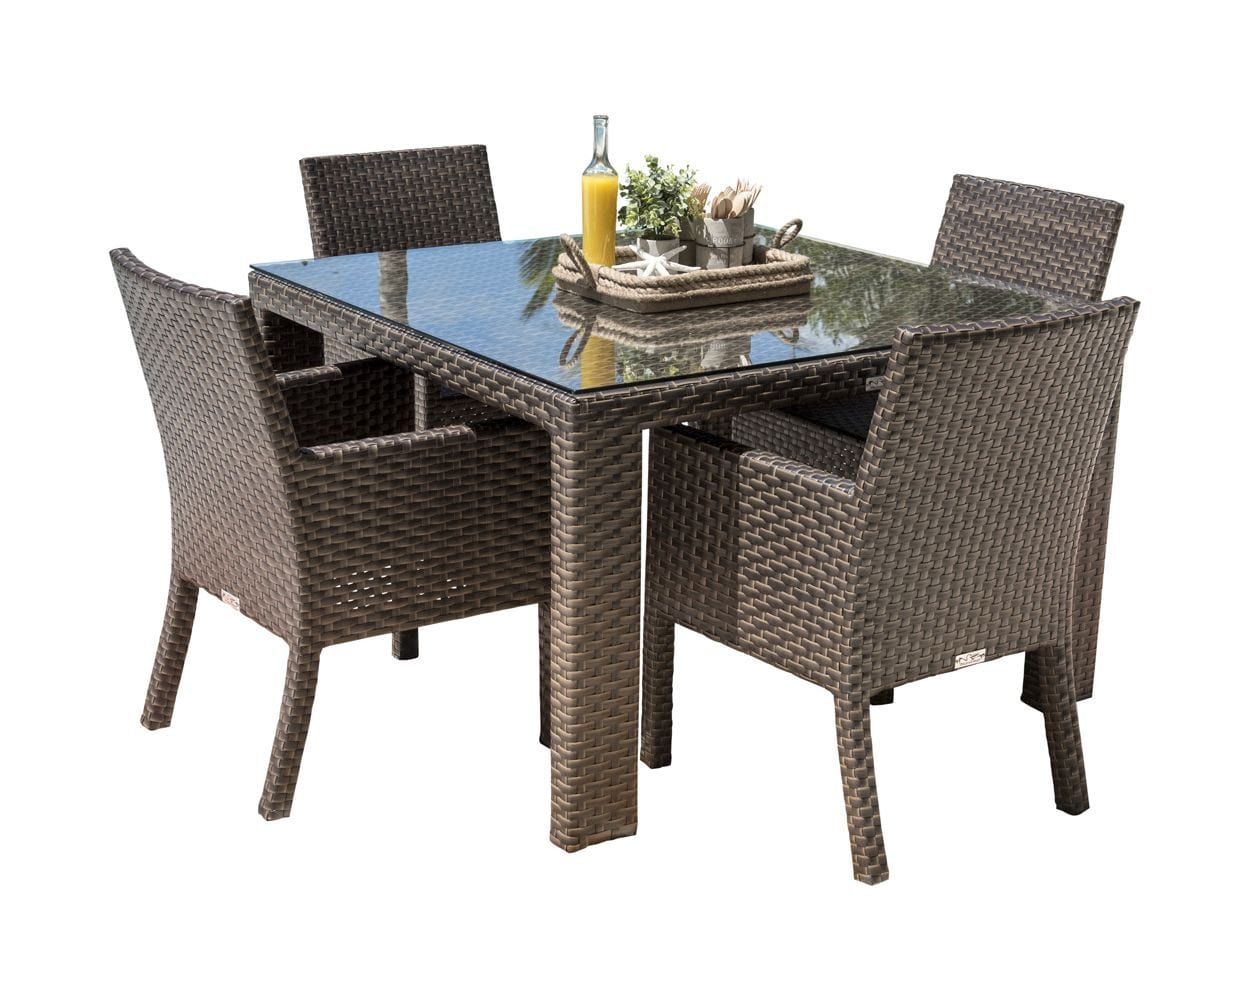 Dreamline Outdoor Garden Patio Dining Set 4 Chairs And 1 Table Set (Brown, Outdoor)